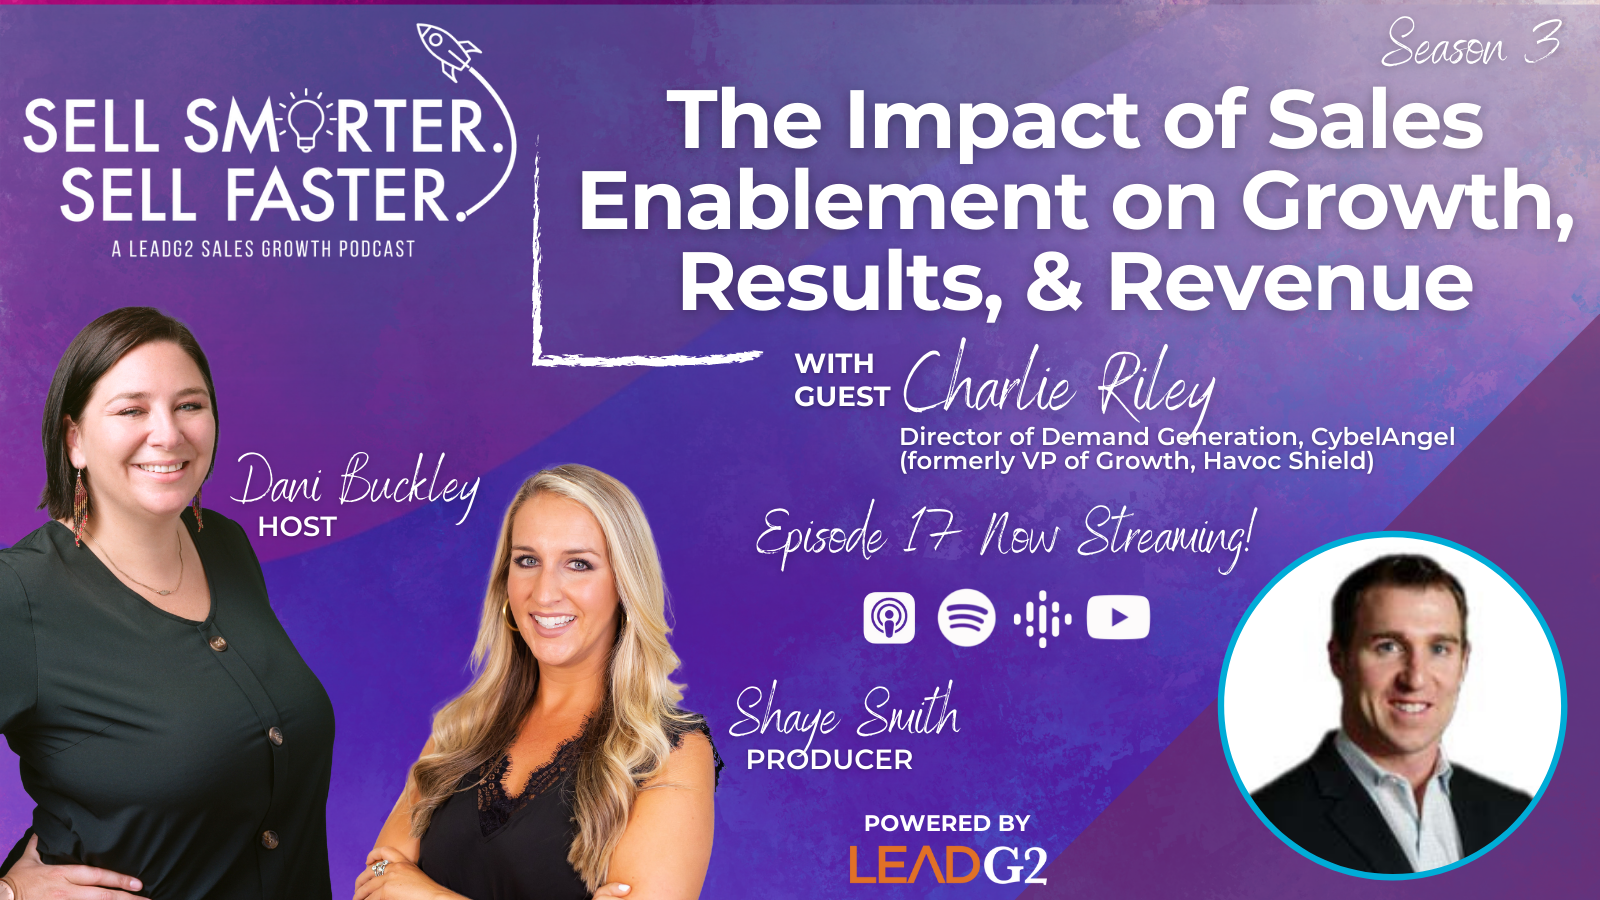 The Impact of Sales Enablement on Growth, Results, & Revenue with Charlie Riley | Sell Smarter. Sell Faster. Ep. 17